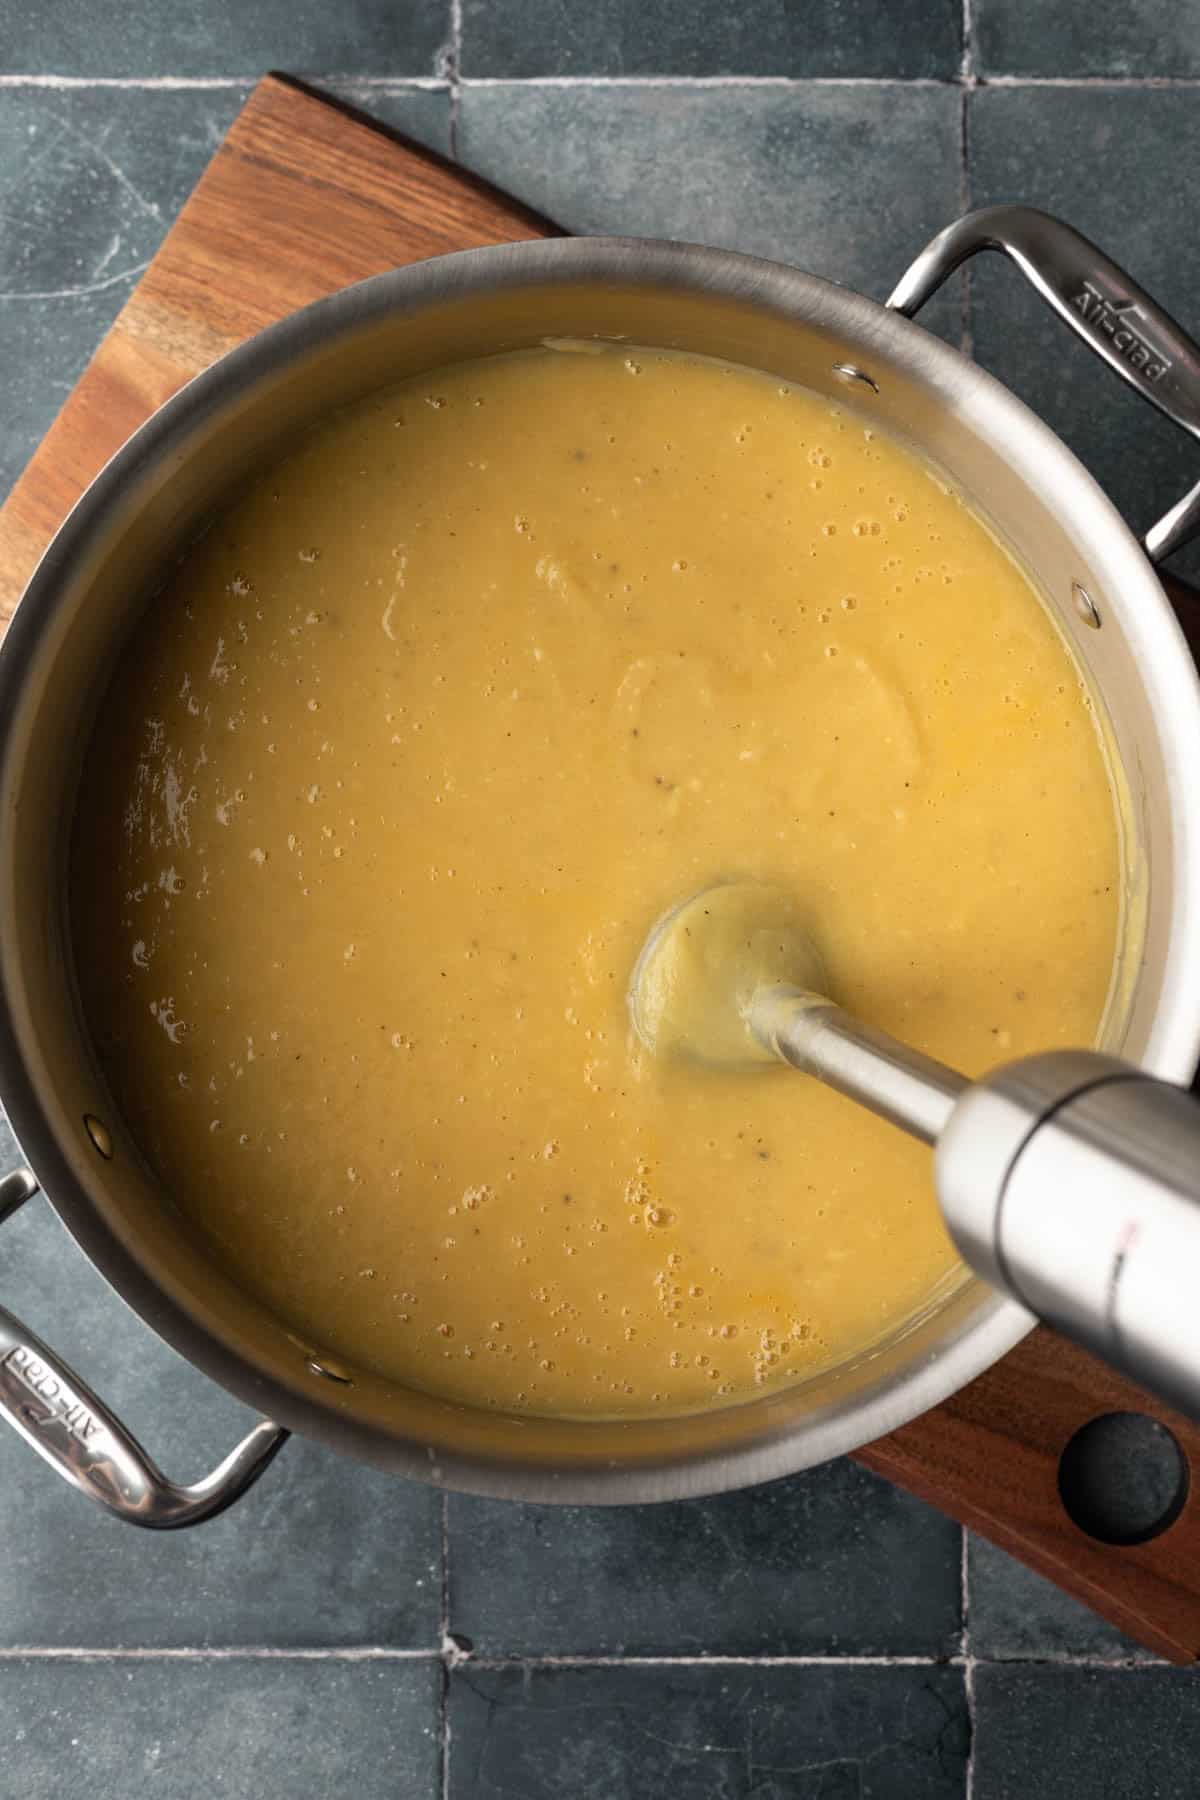 Using an immersion blender to puree the creamy soup.